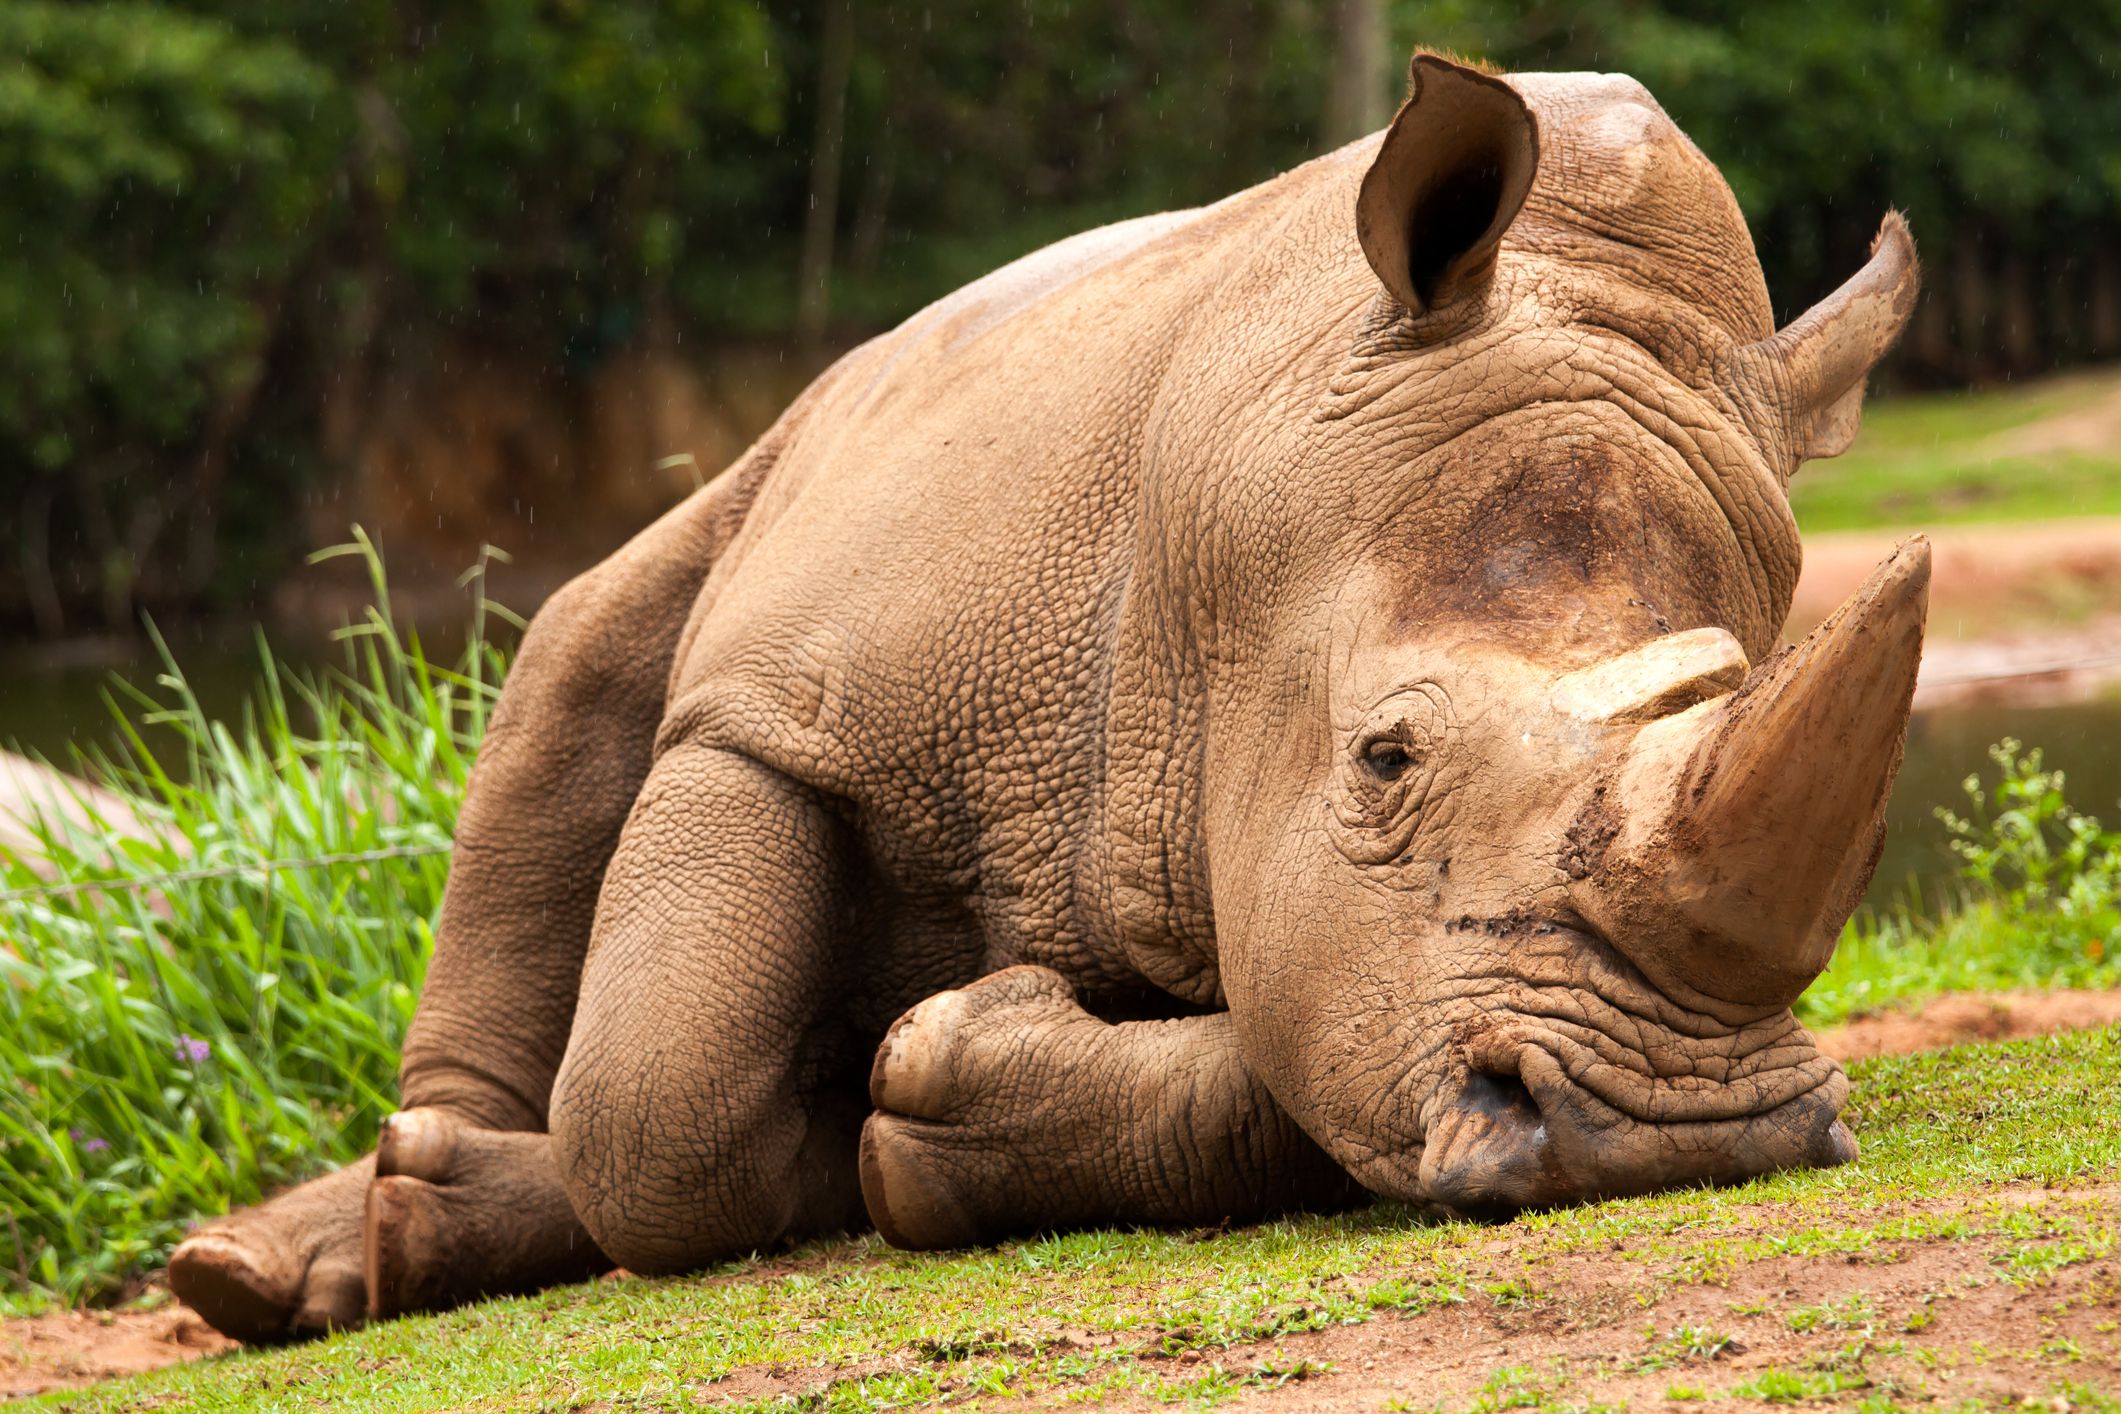 <p>The Northern White Rhino was <a href="https://www.bbc.com/future/article/20240124-the-photo-of-sudan-the-last-male-northern-white-rhino">officially declared extinct</a> in 2018 with the death of Sudan, the last male of the species that died at the age of 45. Intense hunting and <a href="https://www.worldwildlife.org/species/white-rhino">poaching for their horns</a> decimated their population and drove them to the brink of extinction. Despite conservation efforts, habitat loss and illegal hunting proved insurmountable obstacles, and their numbers were unable to ever bounce back. </p>